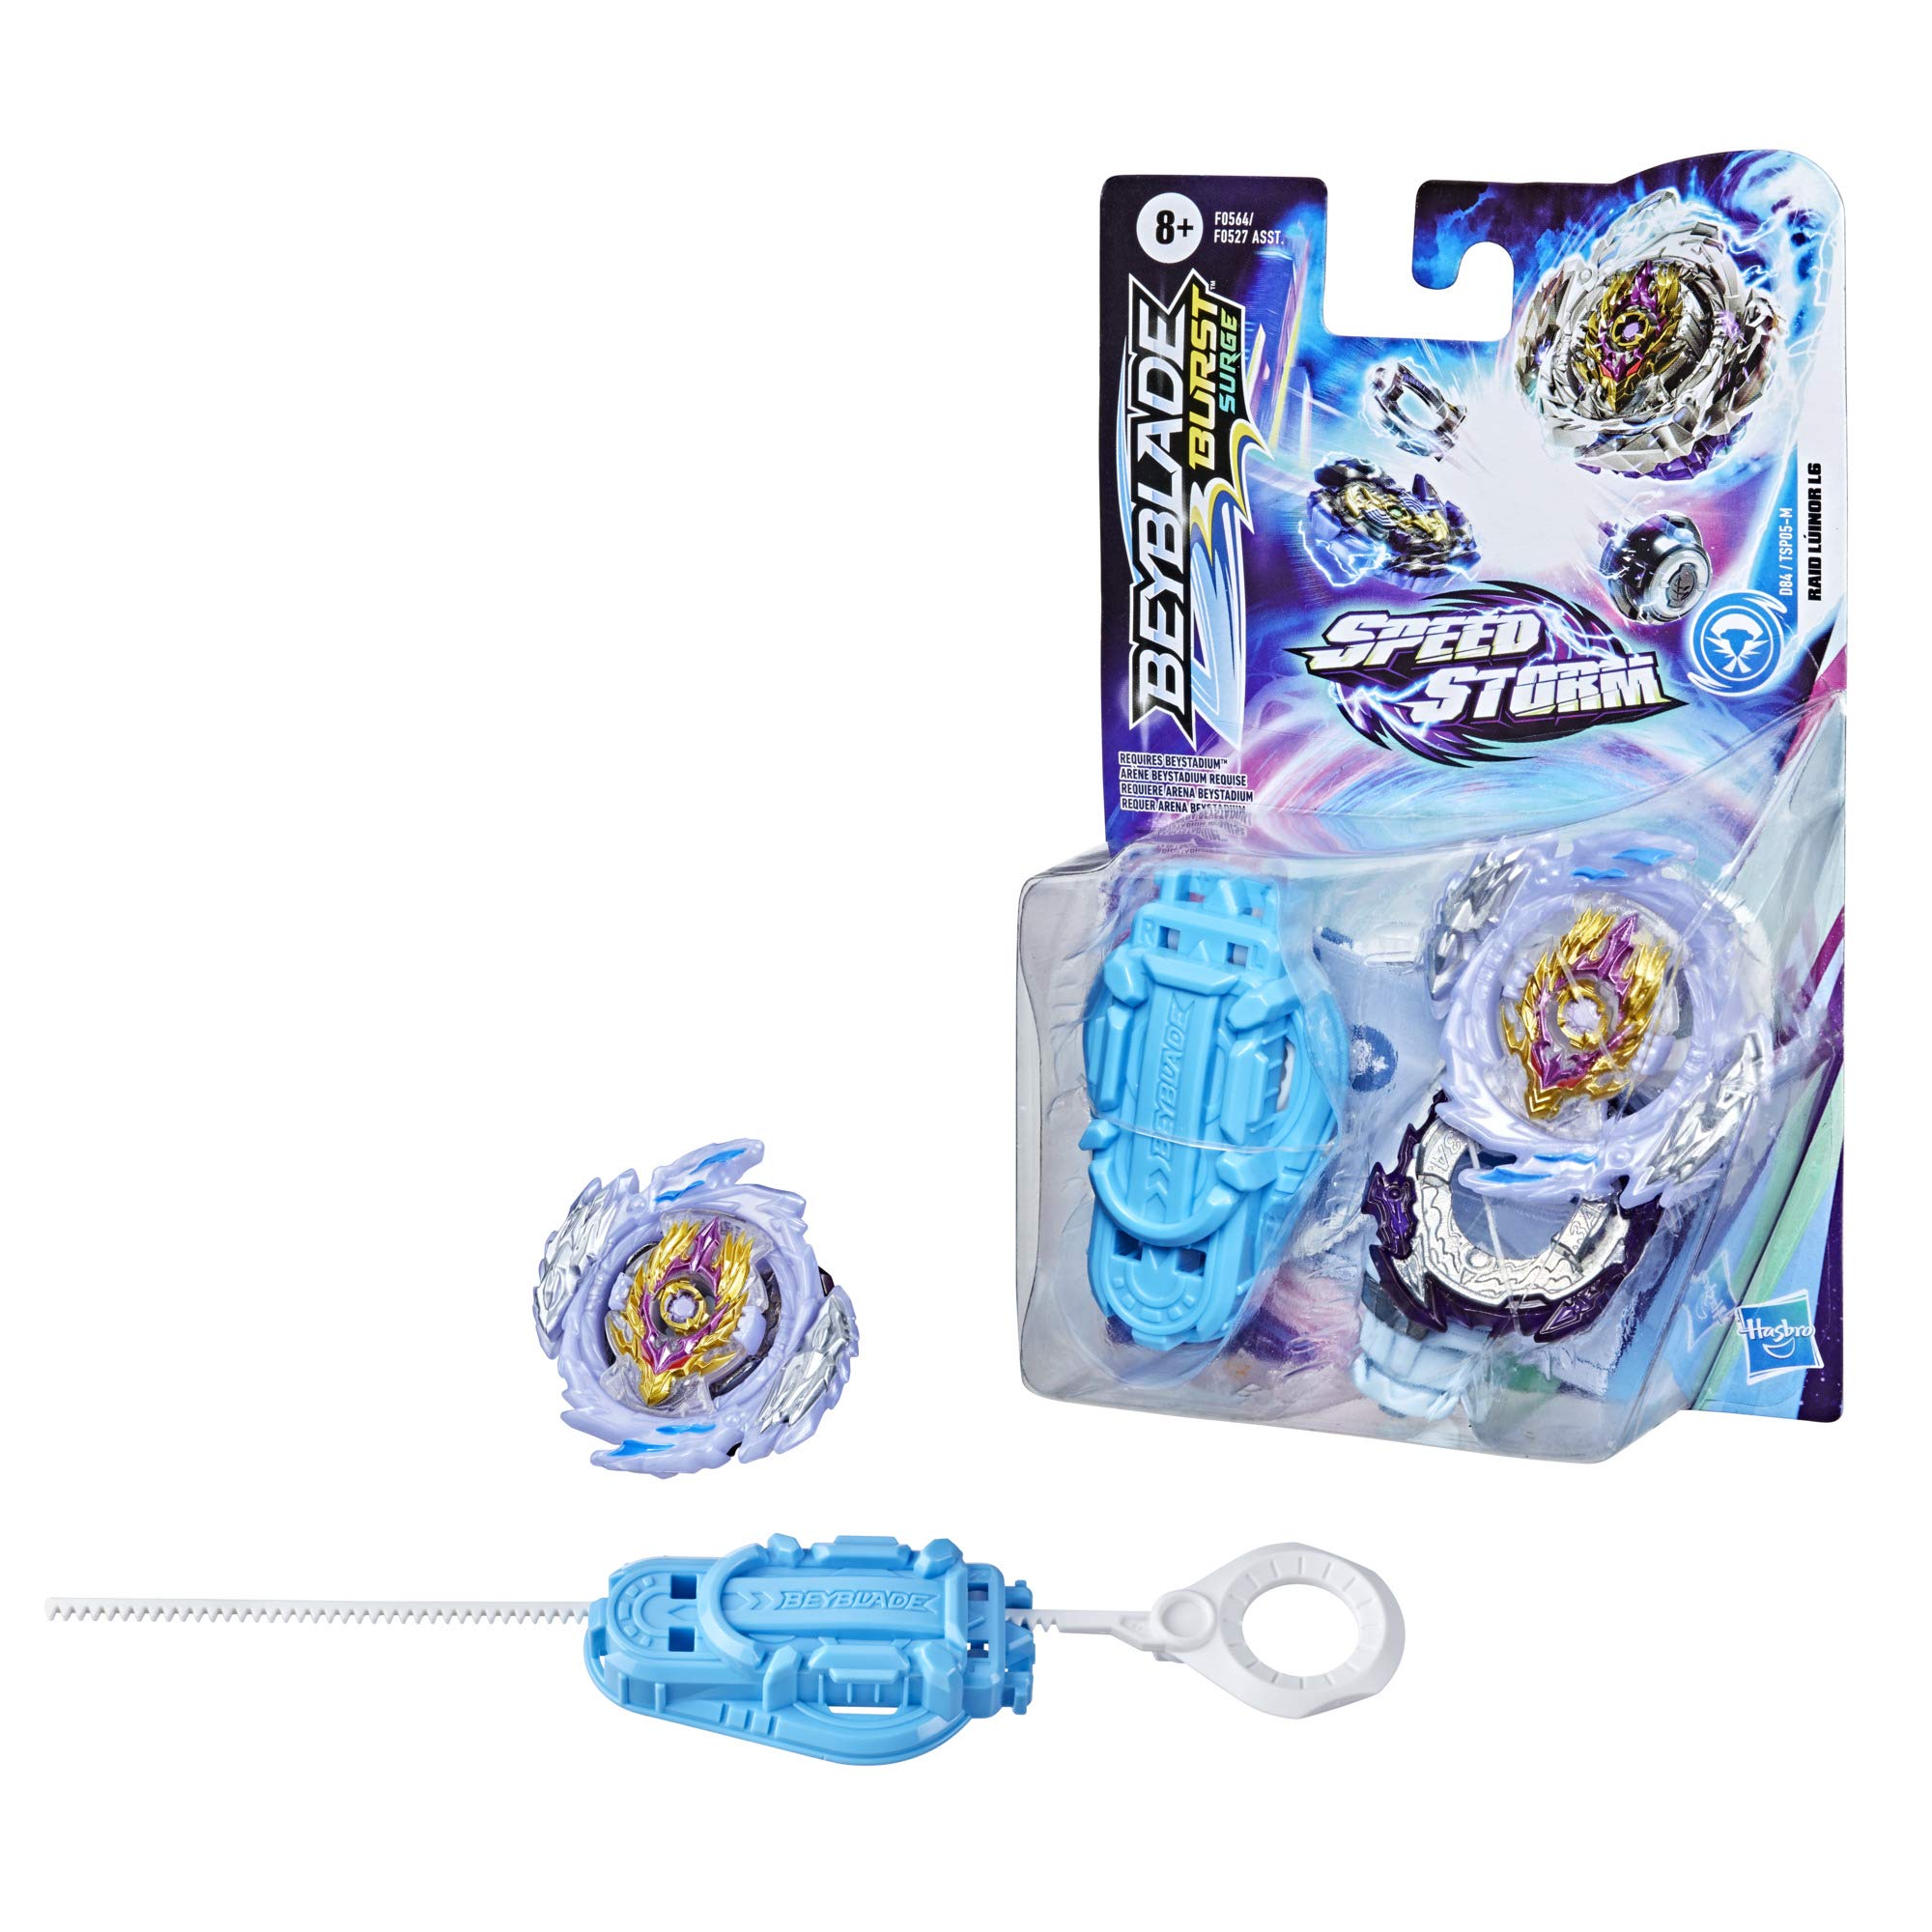 BEYBLADE Burst Surge Speedstorm Raid Luinor L6 Spinning Top Starter Pack – Attack Type Battling Game Top with Launcher, Toy for Kids